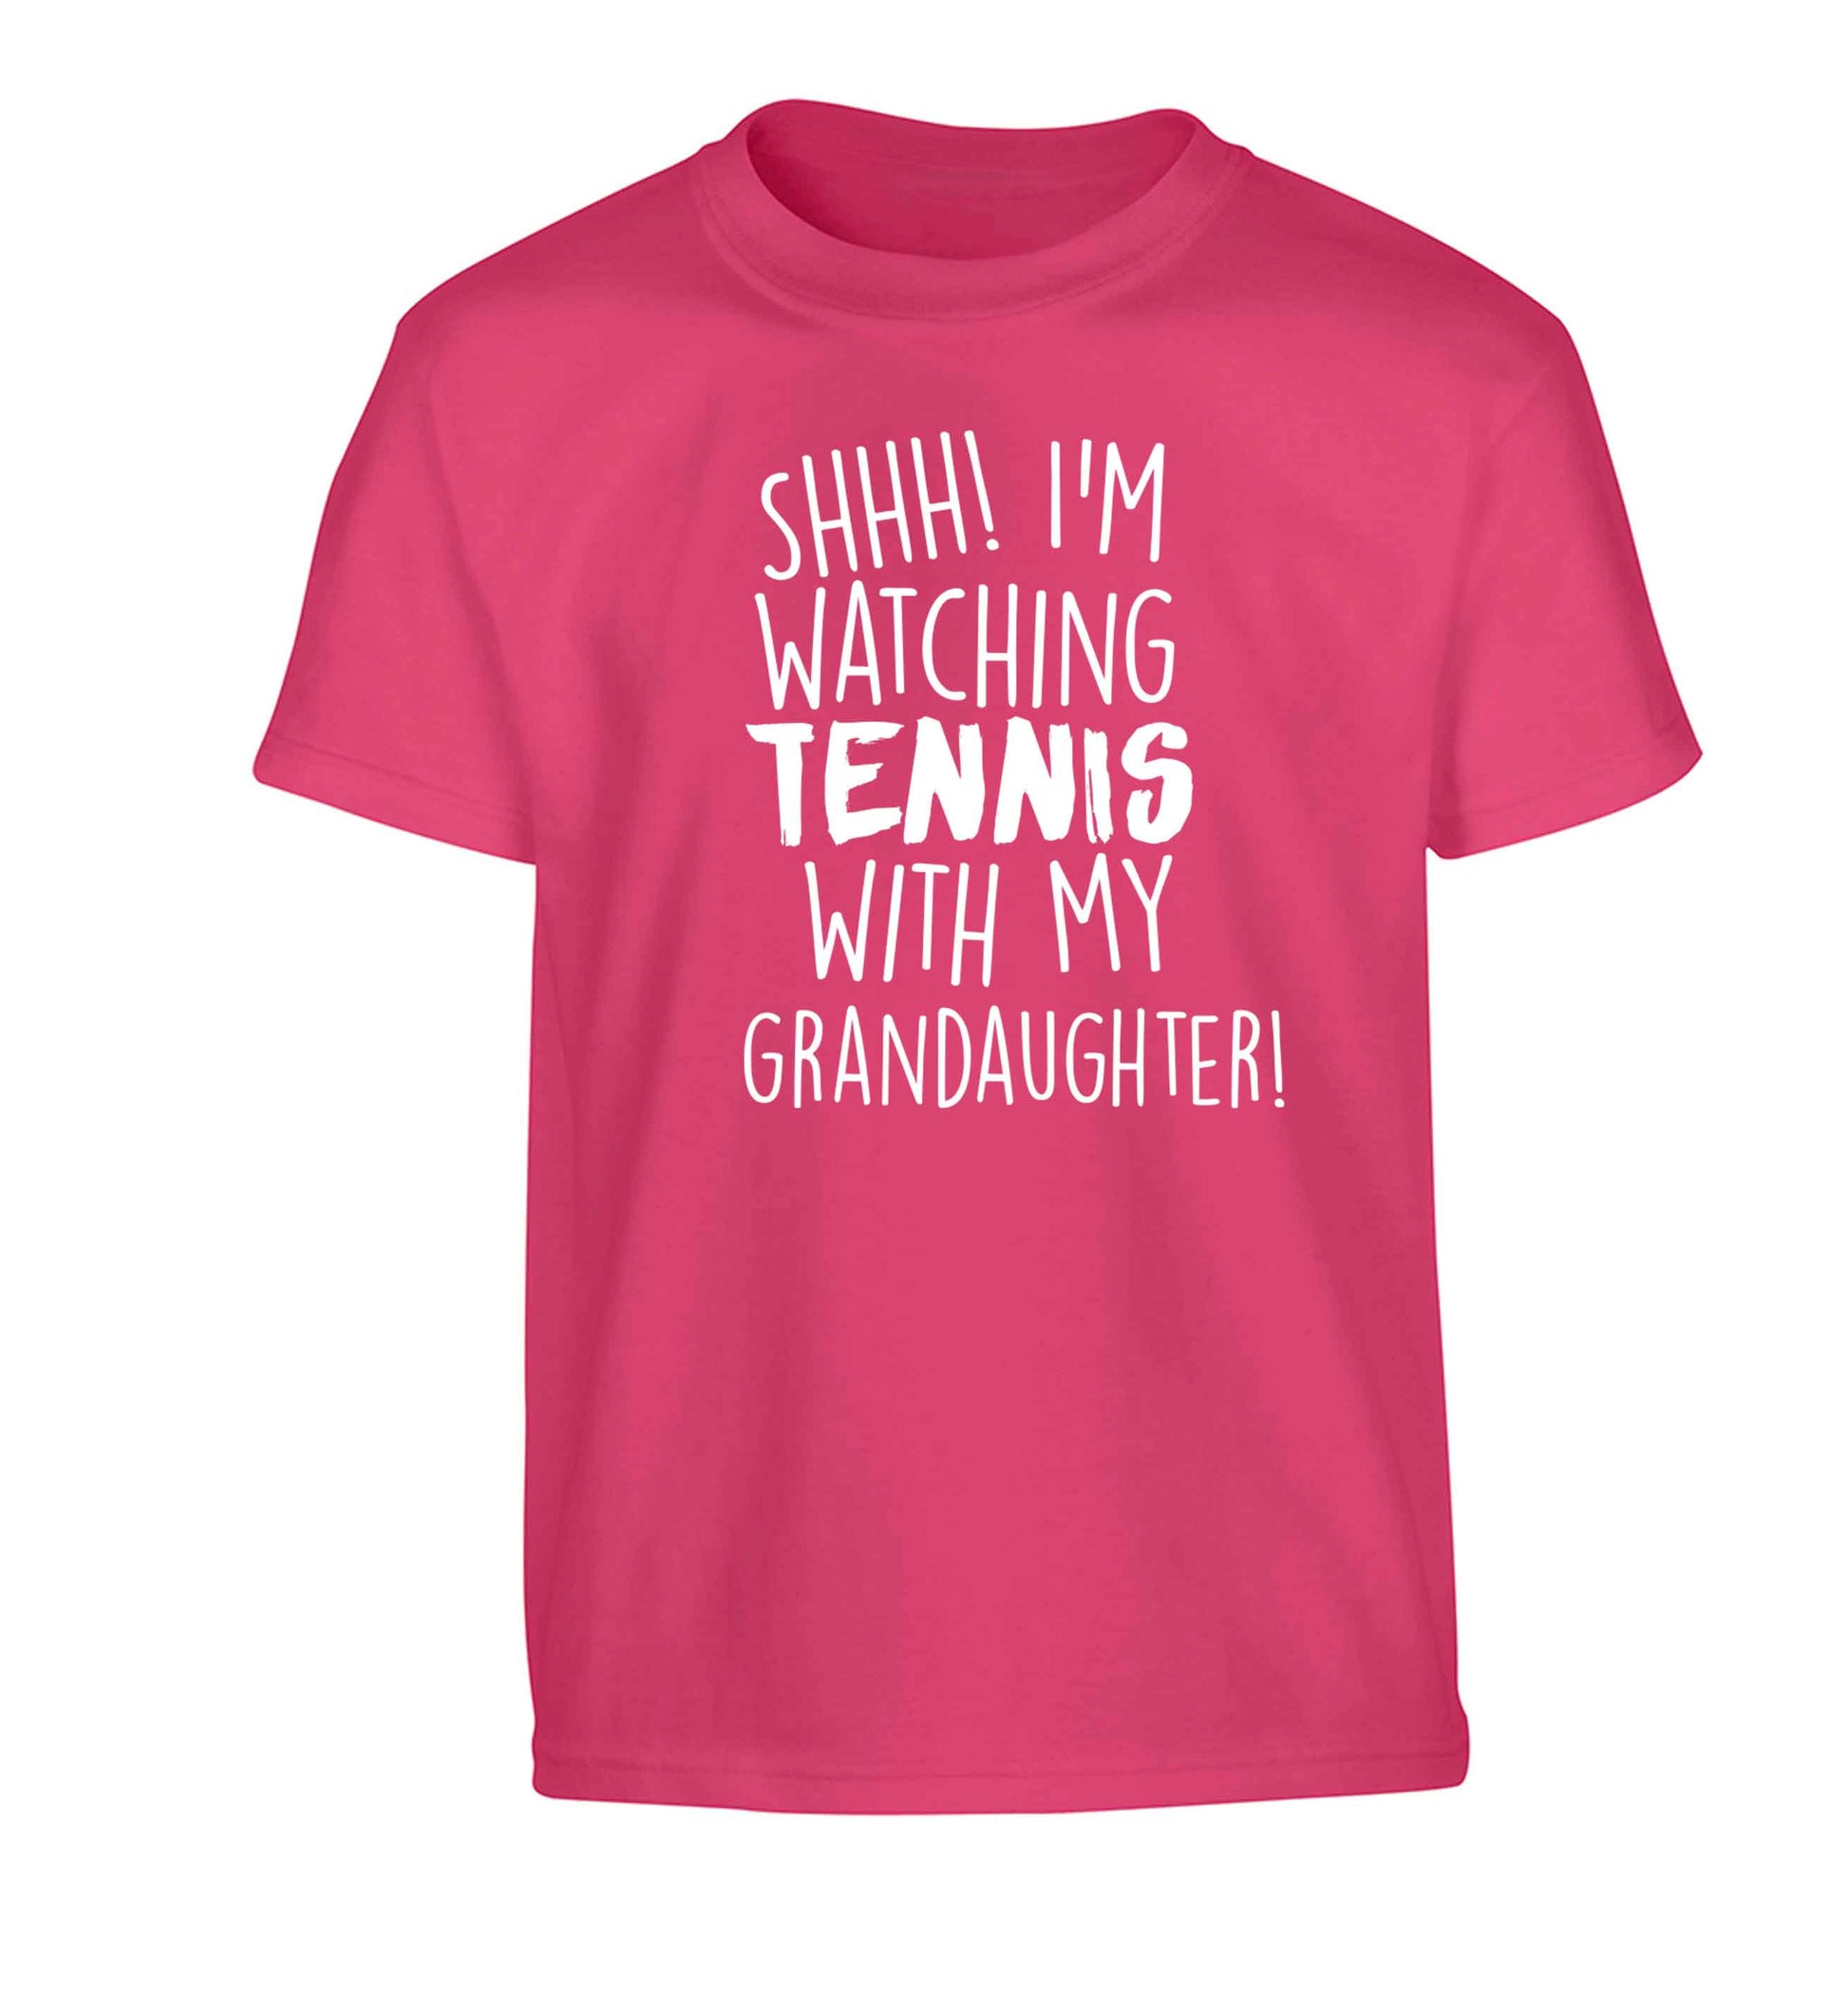 Shh! I'm watching tennis with my granddaughter! Children's pink Tshirt 12-13 Years